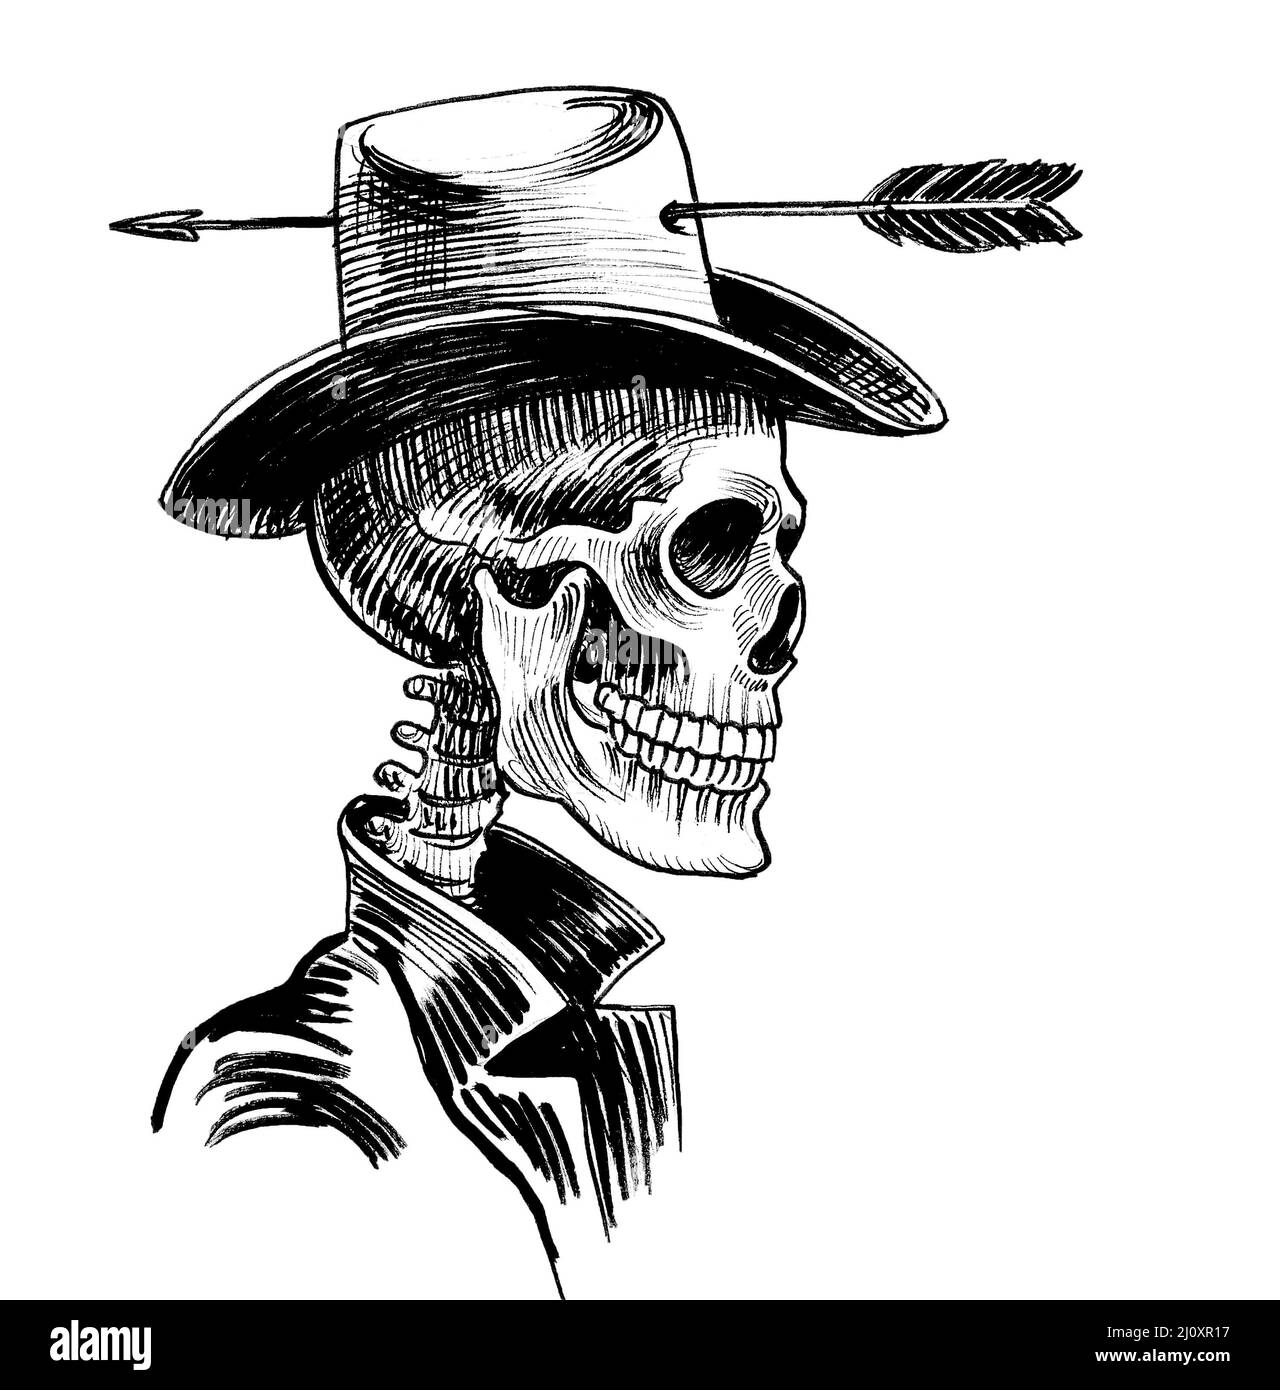 Skeleton Cowboy by Louis Bicycle at Old Crow Tattoo in Oakland CA  r tattoos